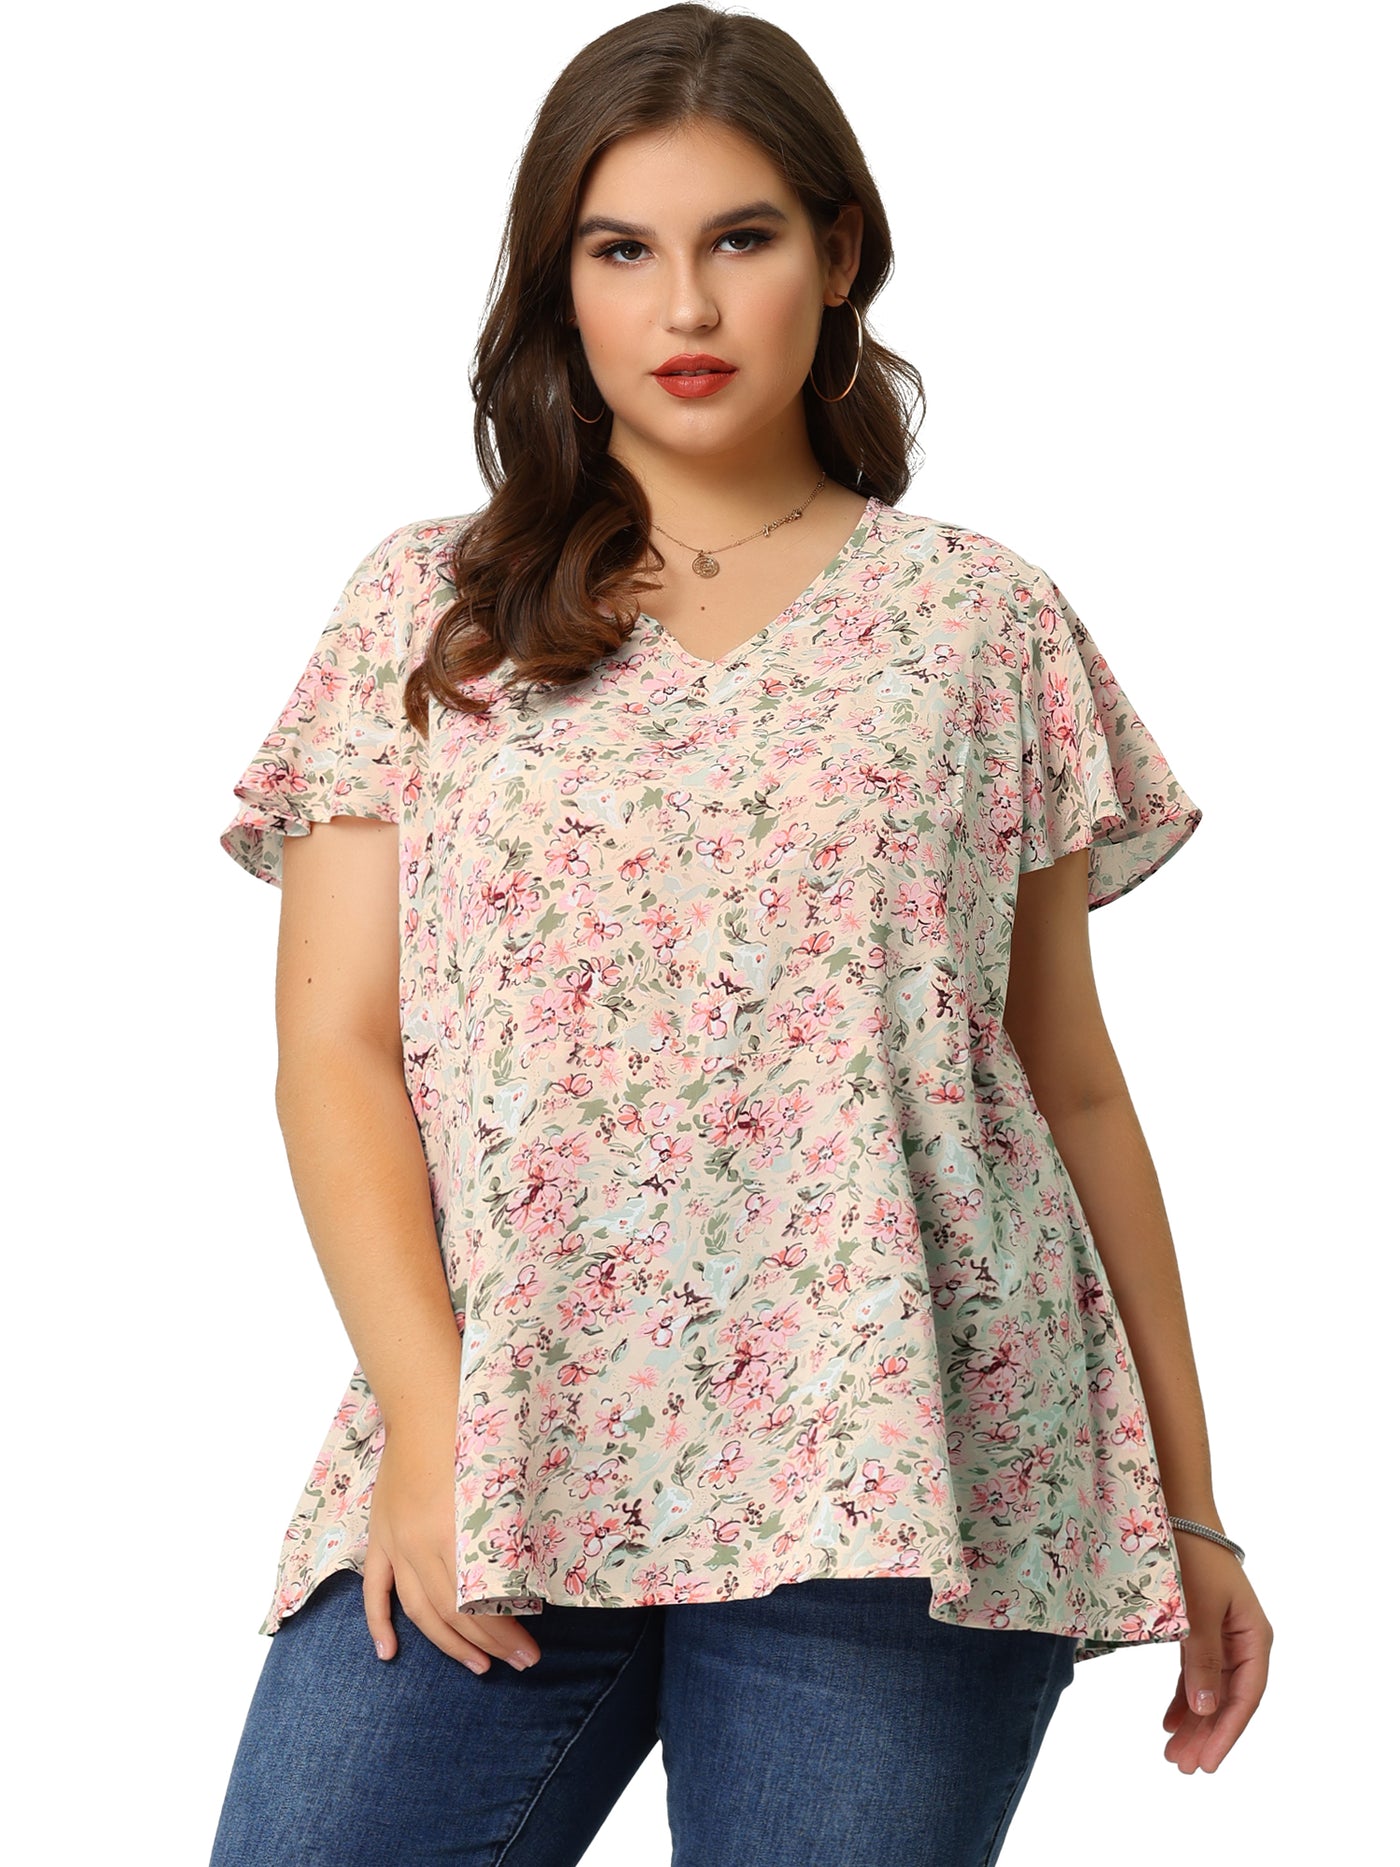 Bublédon Woven Relax Fit Watercolor V Neck Short Sleeve Top